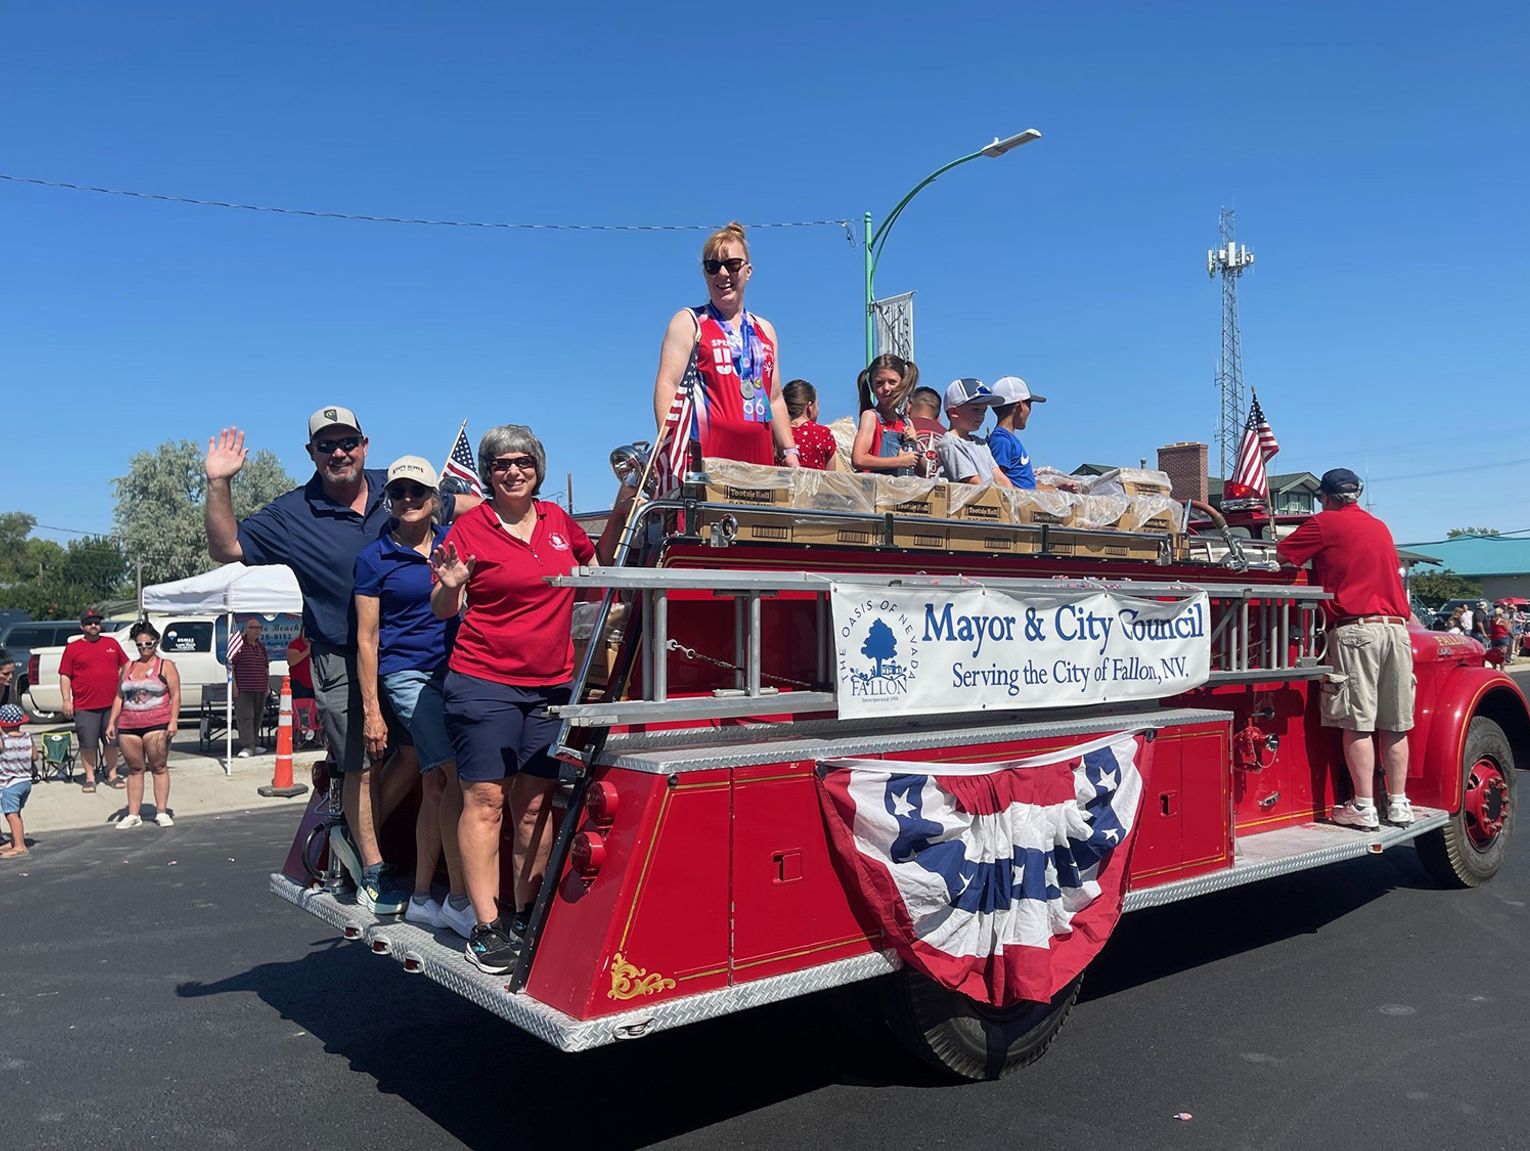 Celebrate Small Town America with the July 4 Parade and Block Party